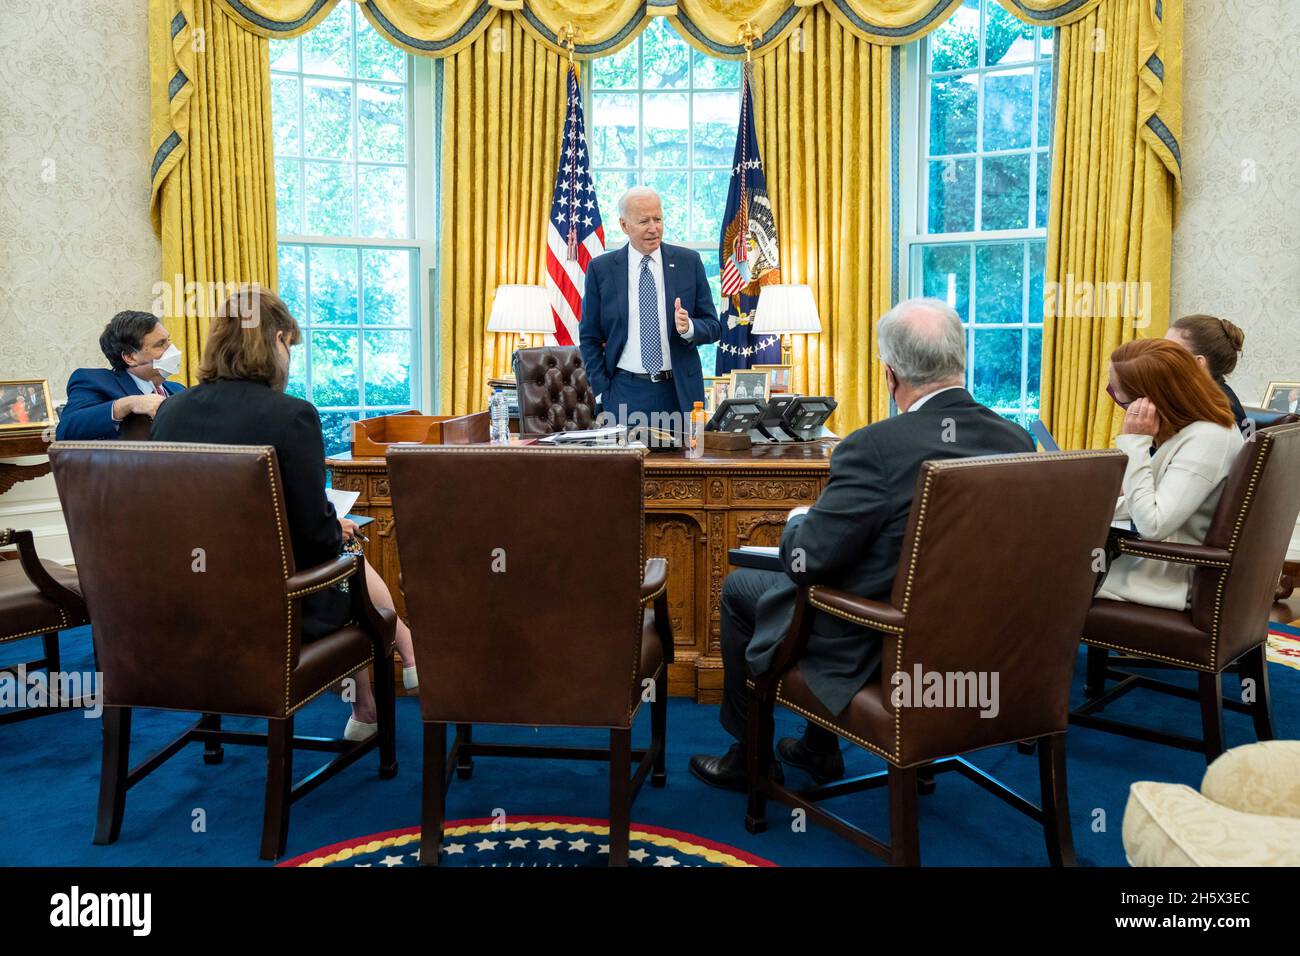 Washington, United States. 24 August, 2021. U.S. President Joe Biden meets with senior staff to discuss the situation in Afghanistan, in the Oval Office of the White House August 24, 2021 in Washington, D.C. Credit: Adam Schultz/White House Photo/Alamy Live News Stock Photo